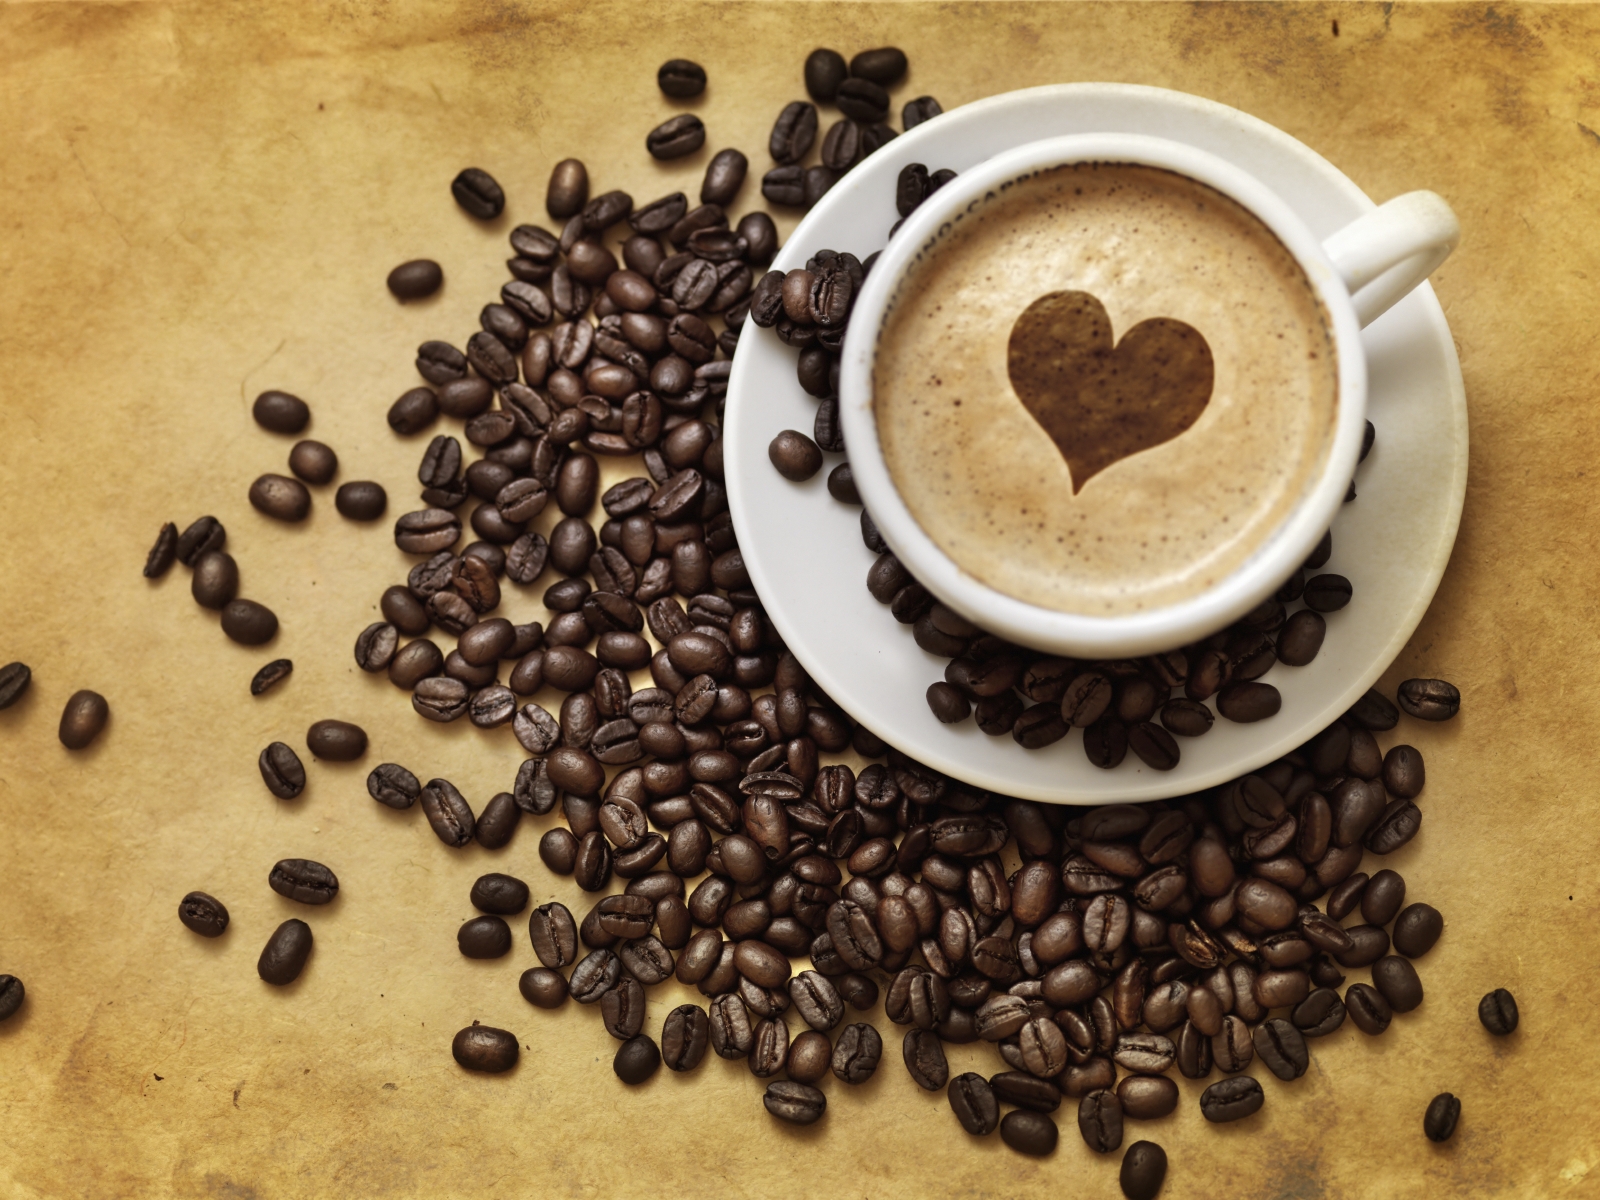 Love Coffee But Not The Toxicity? Minimize Health Risks With These 